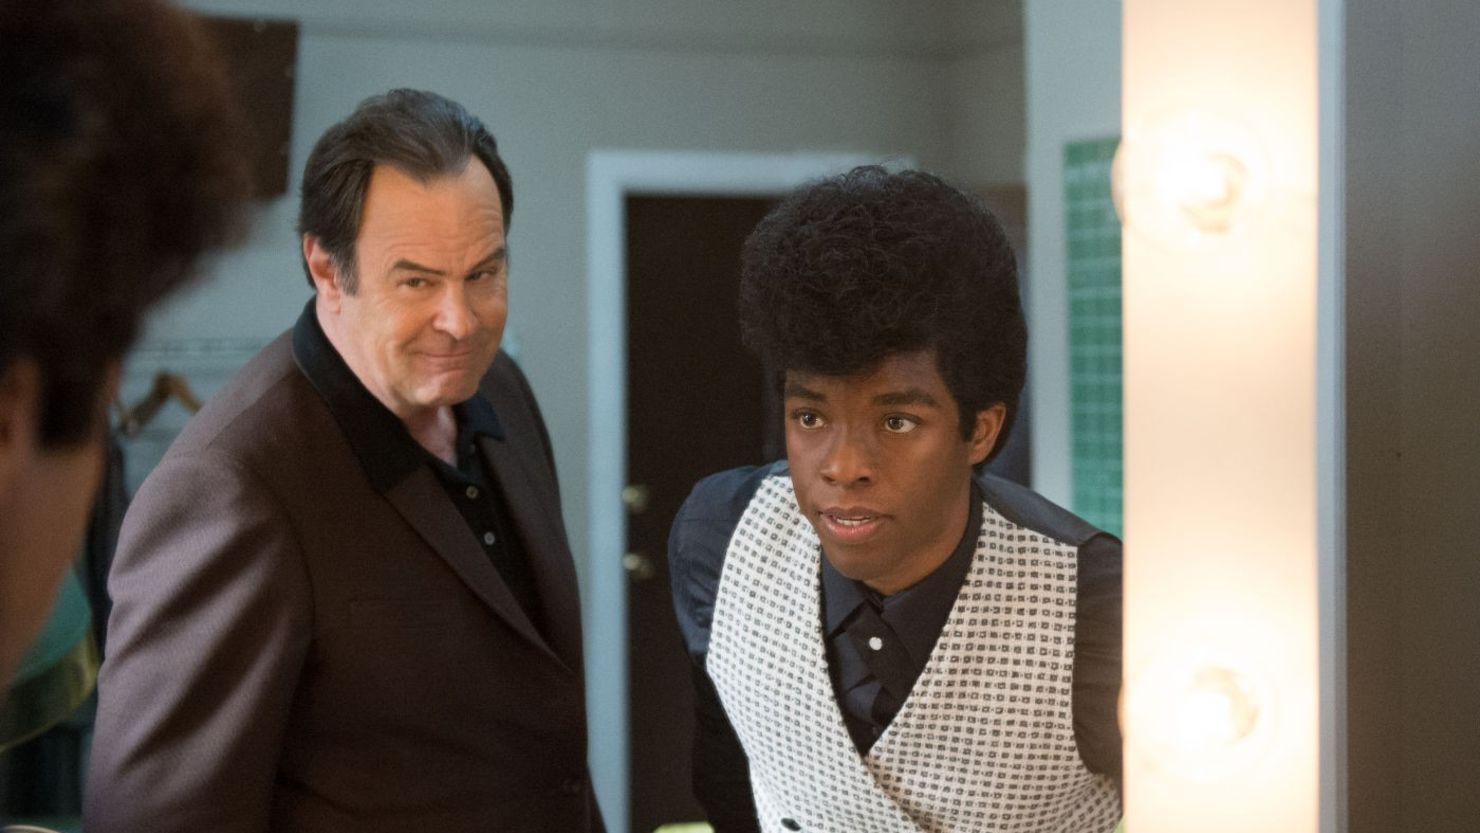 Dan Aykroyd, left, plays Ben Bart in "Get On Up" along with Chadwick Boseman as James Brown.